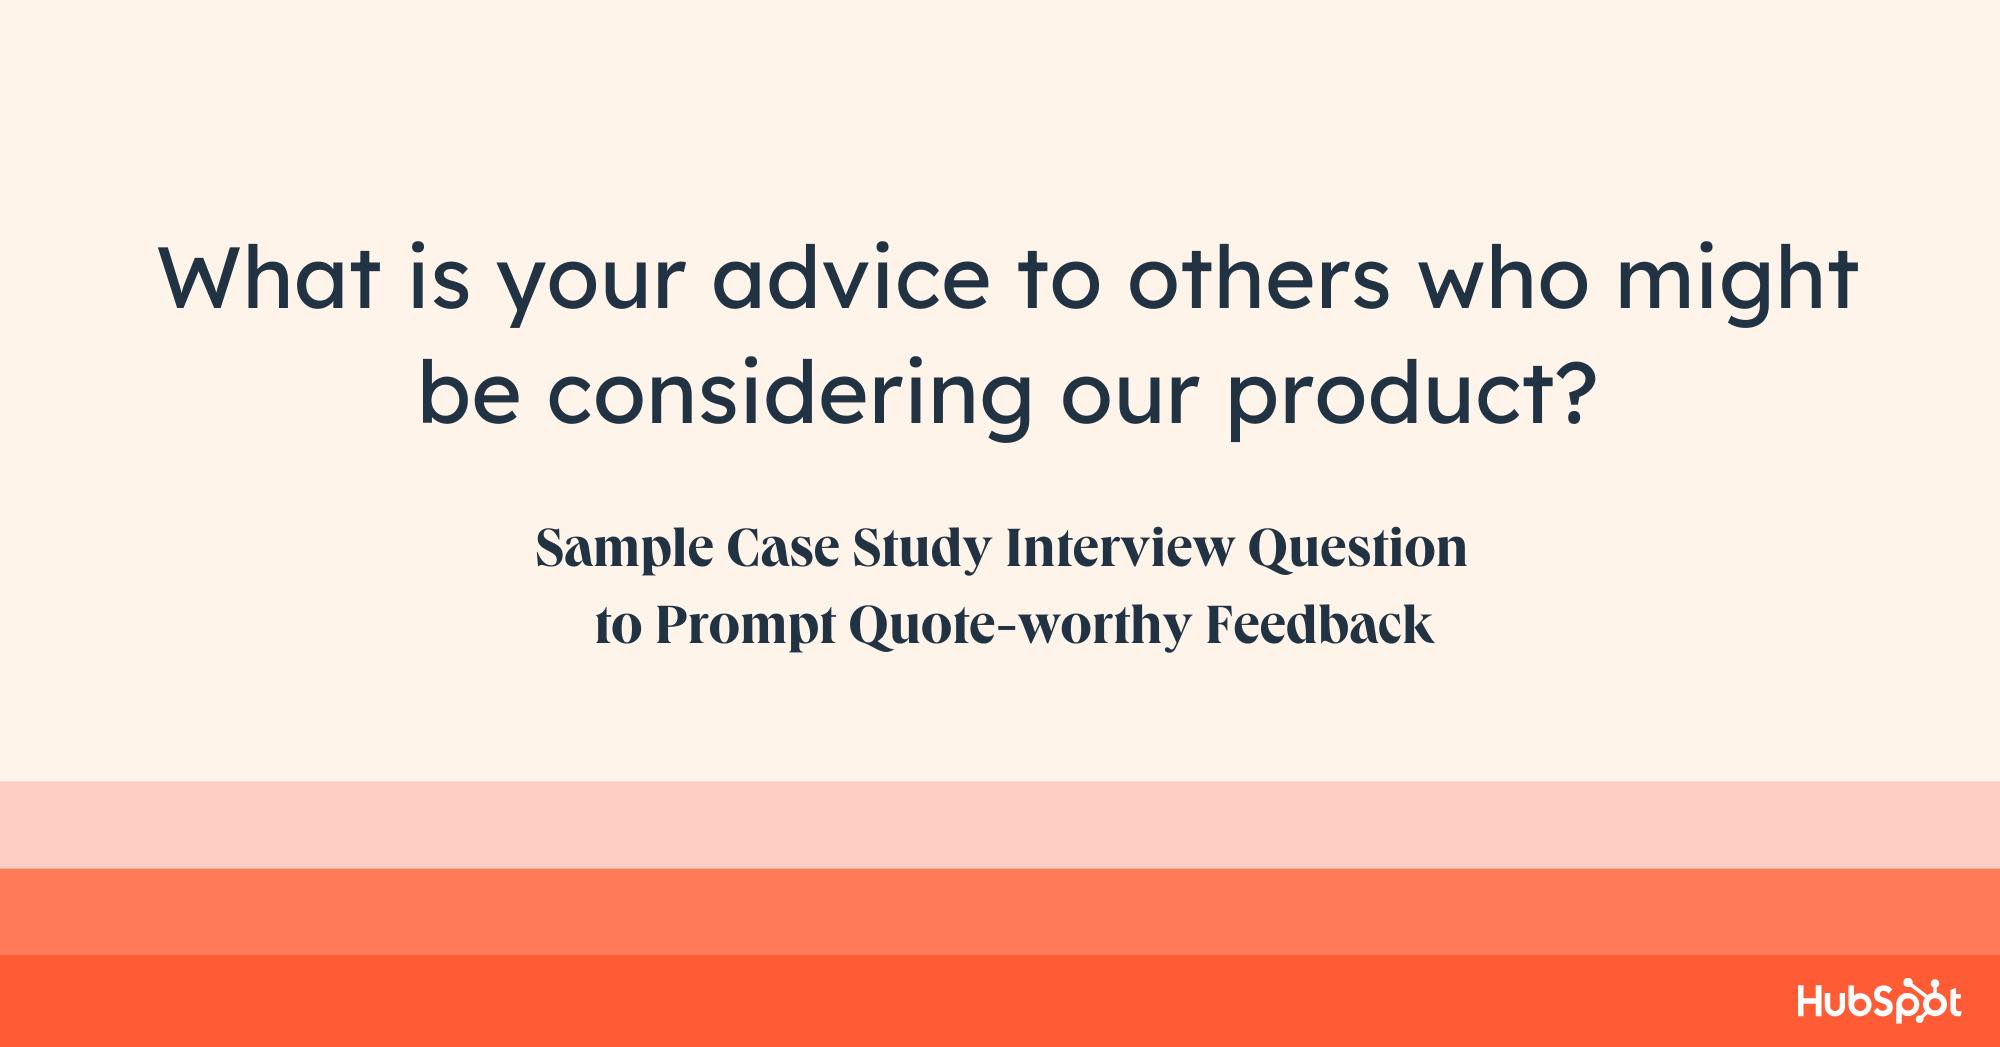 case study questions to ask, what is your advice to others who might be considering our product?